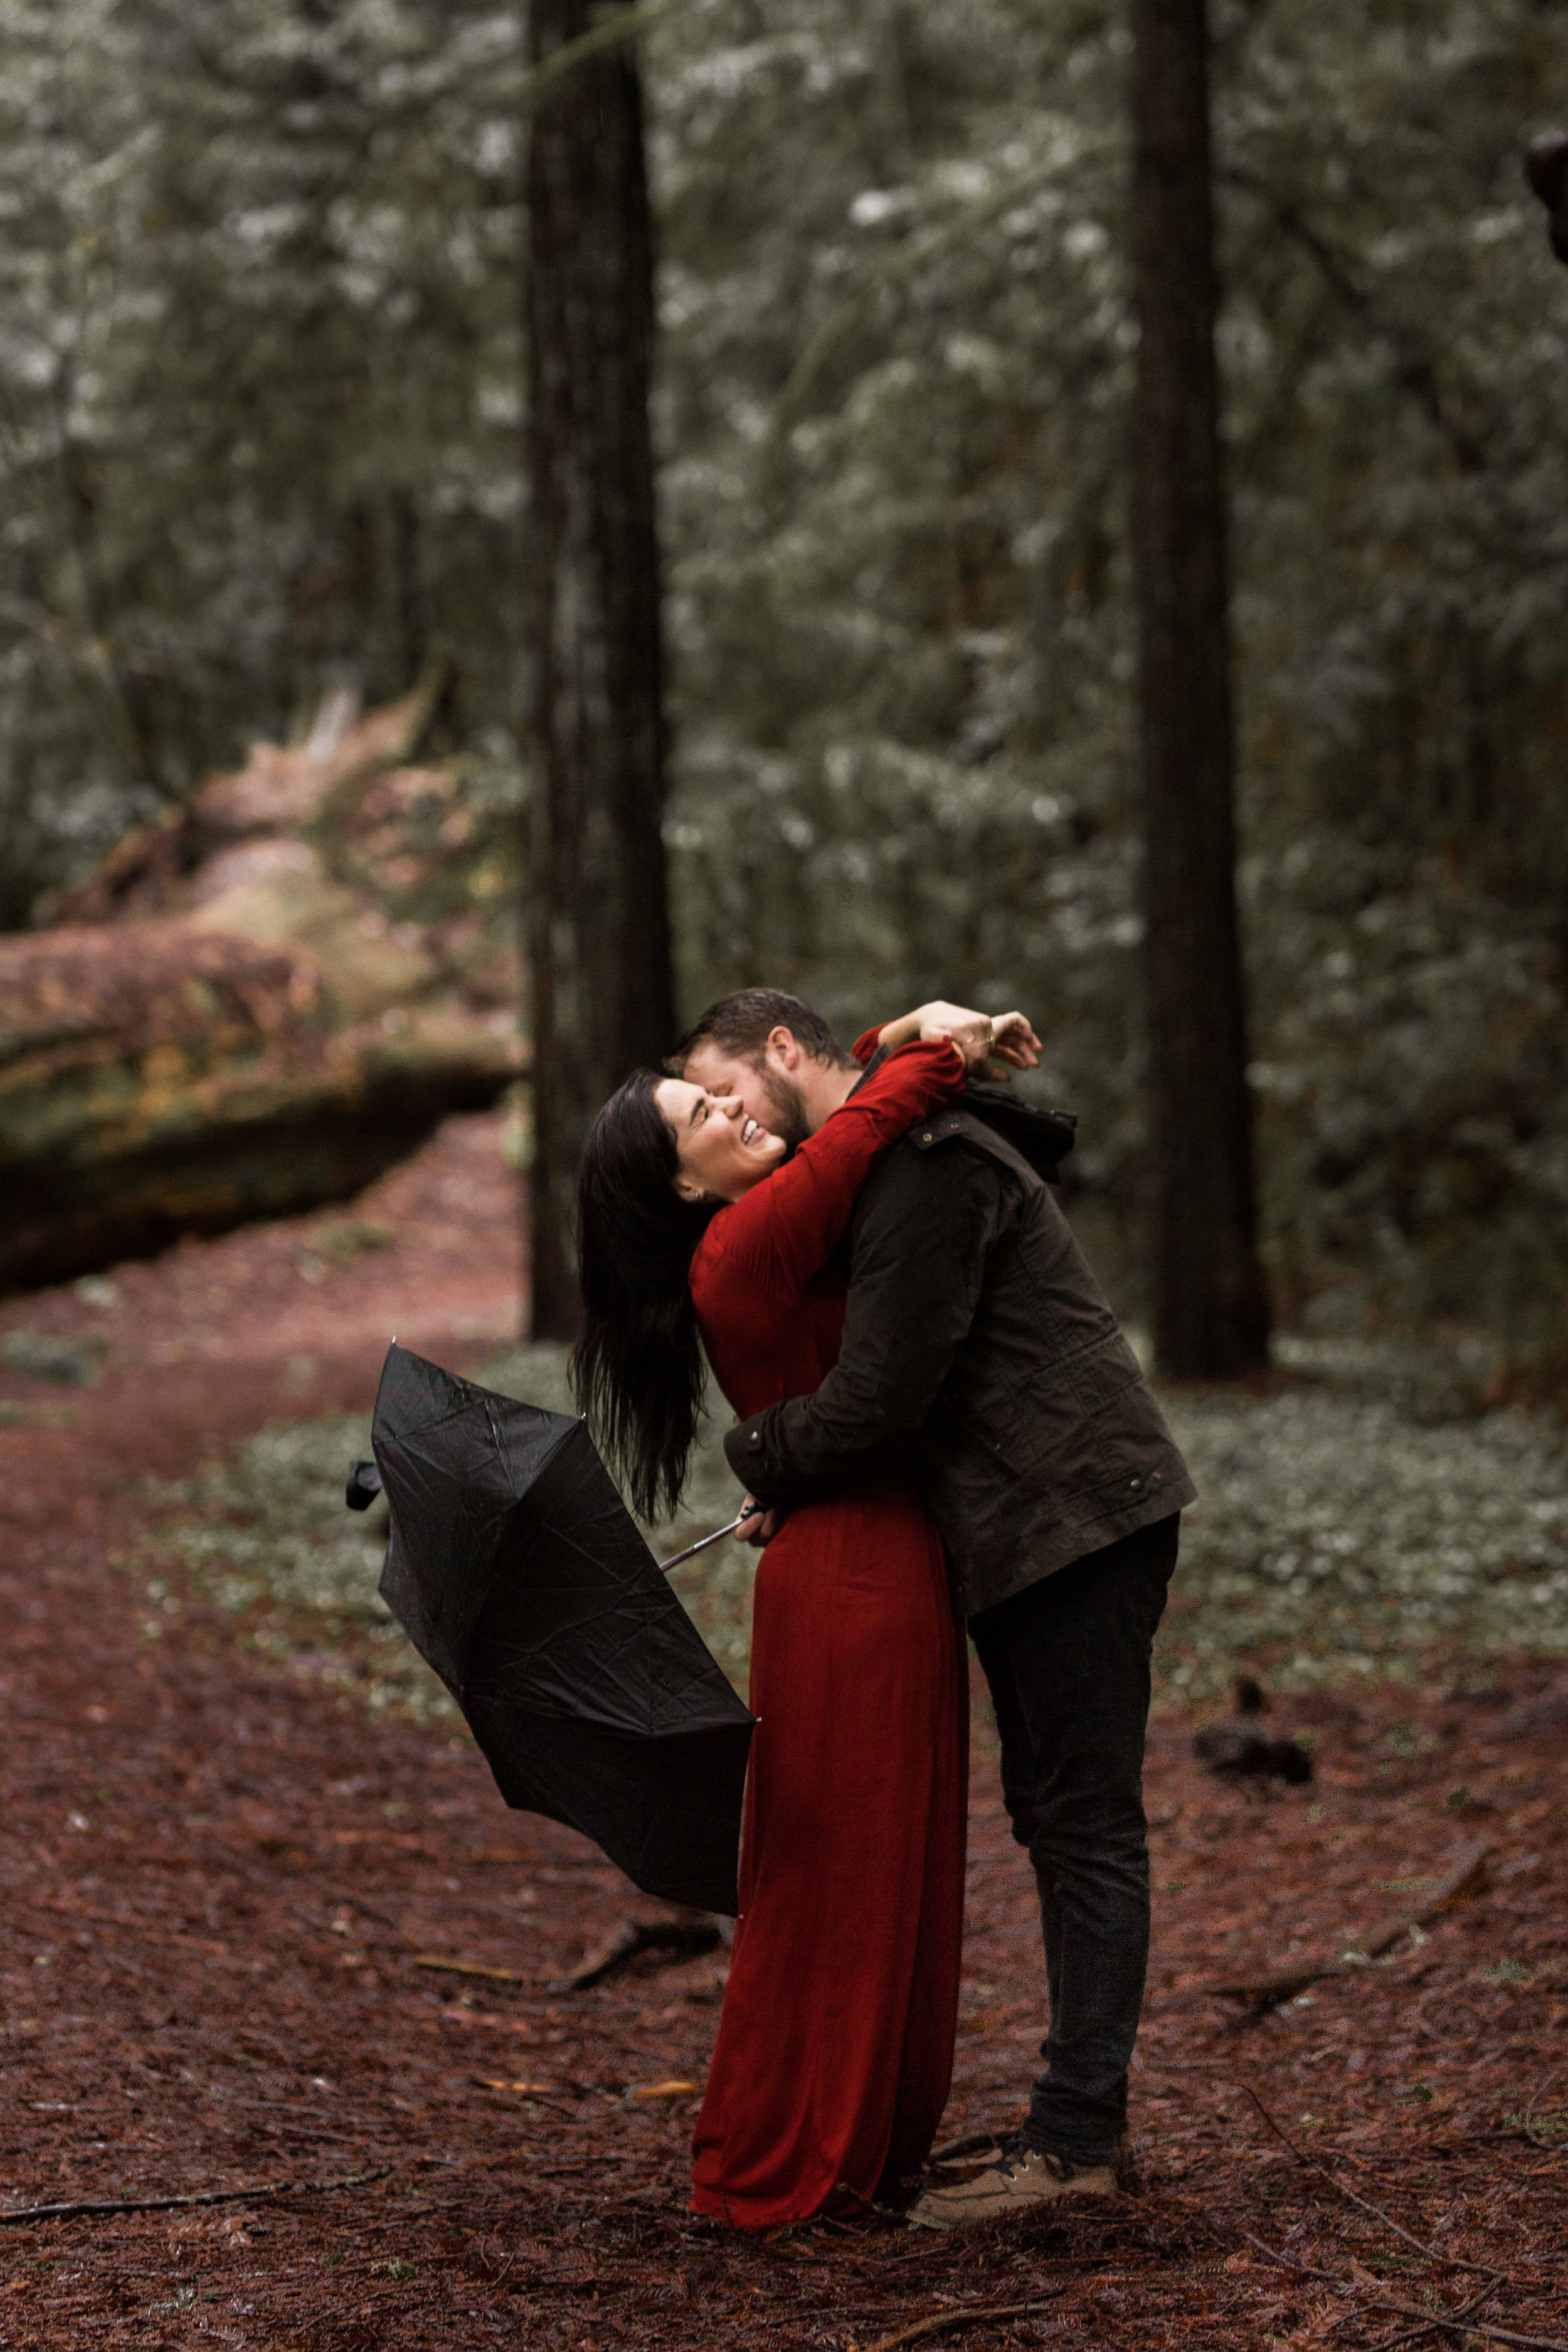 nicole-daacke-photography-redwoods-national-park-forest-rainy-foggy-adventure-engagement-session-humboldt-county-old-growth-redwood-tree-elopement-intimate-wedding-photographer-42.jpg